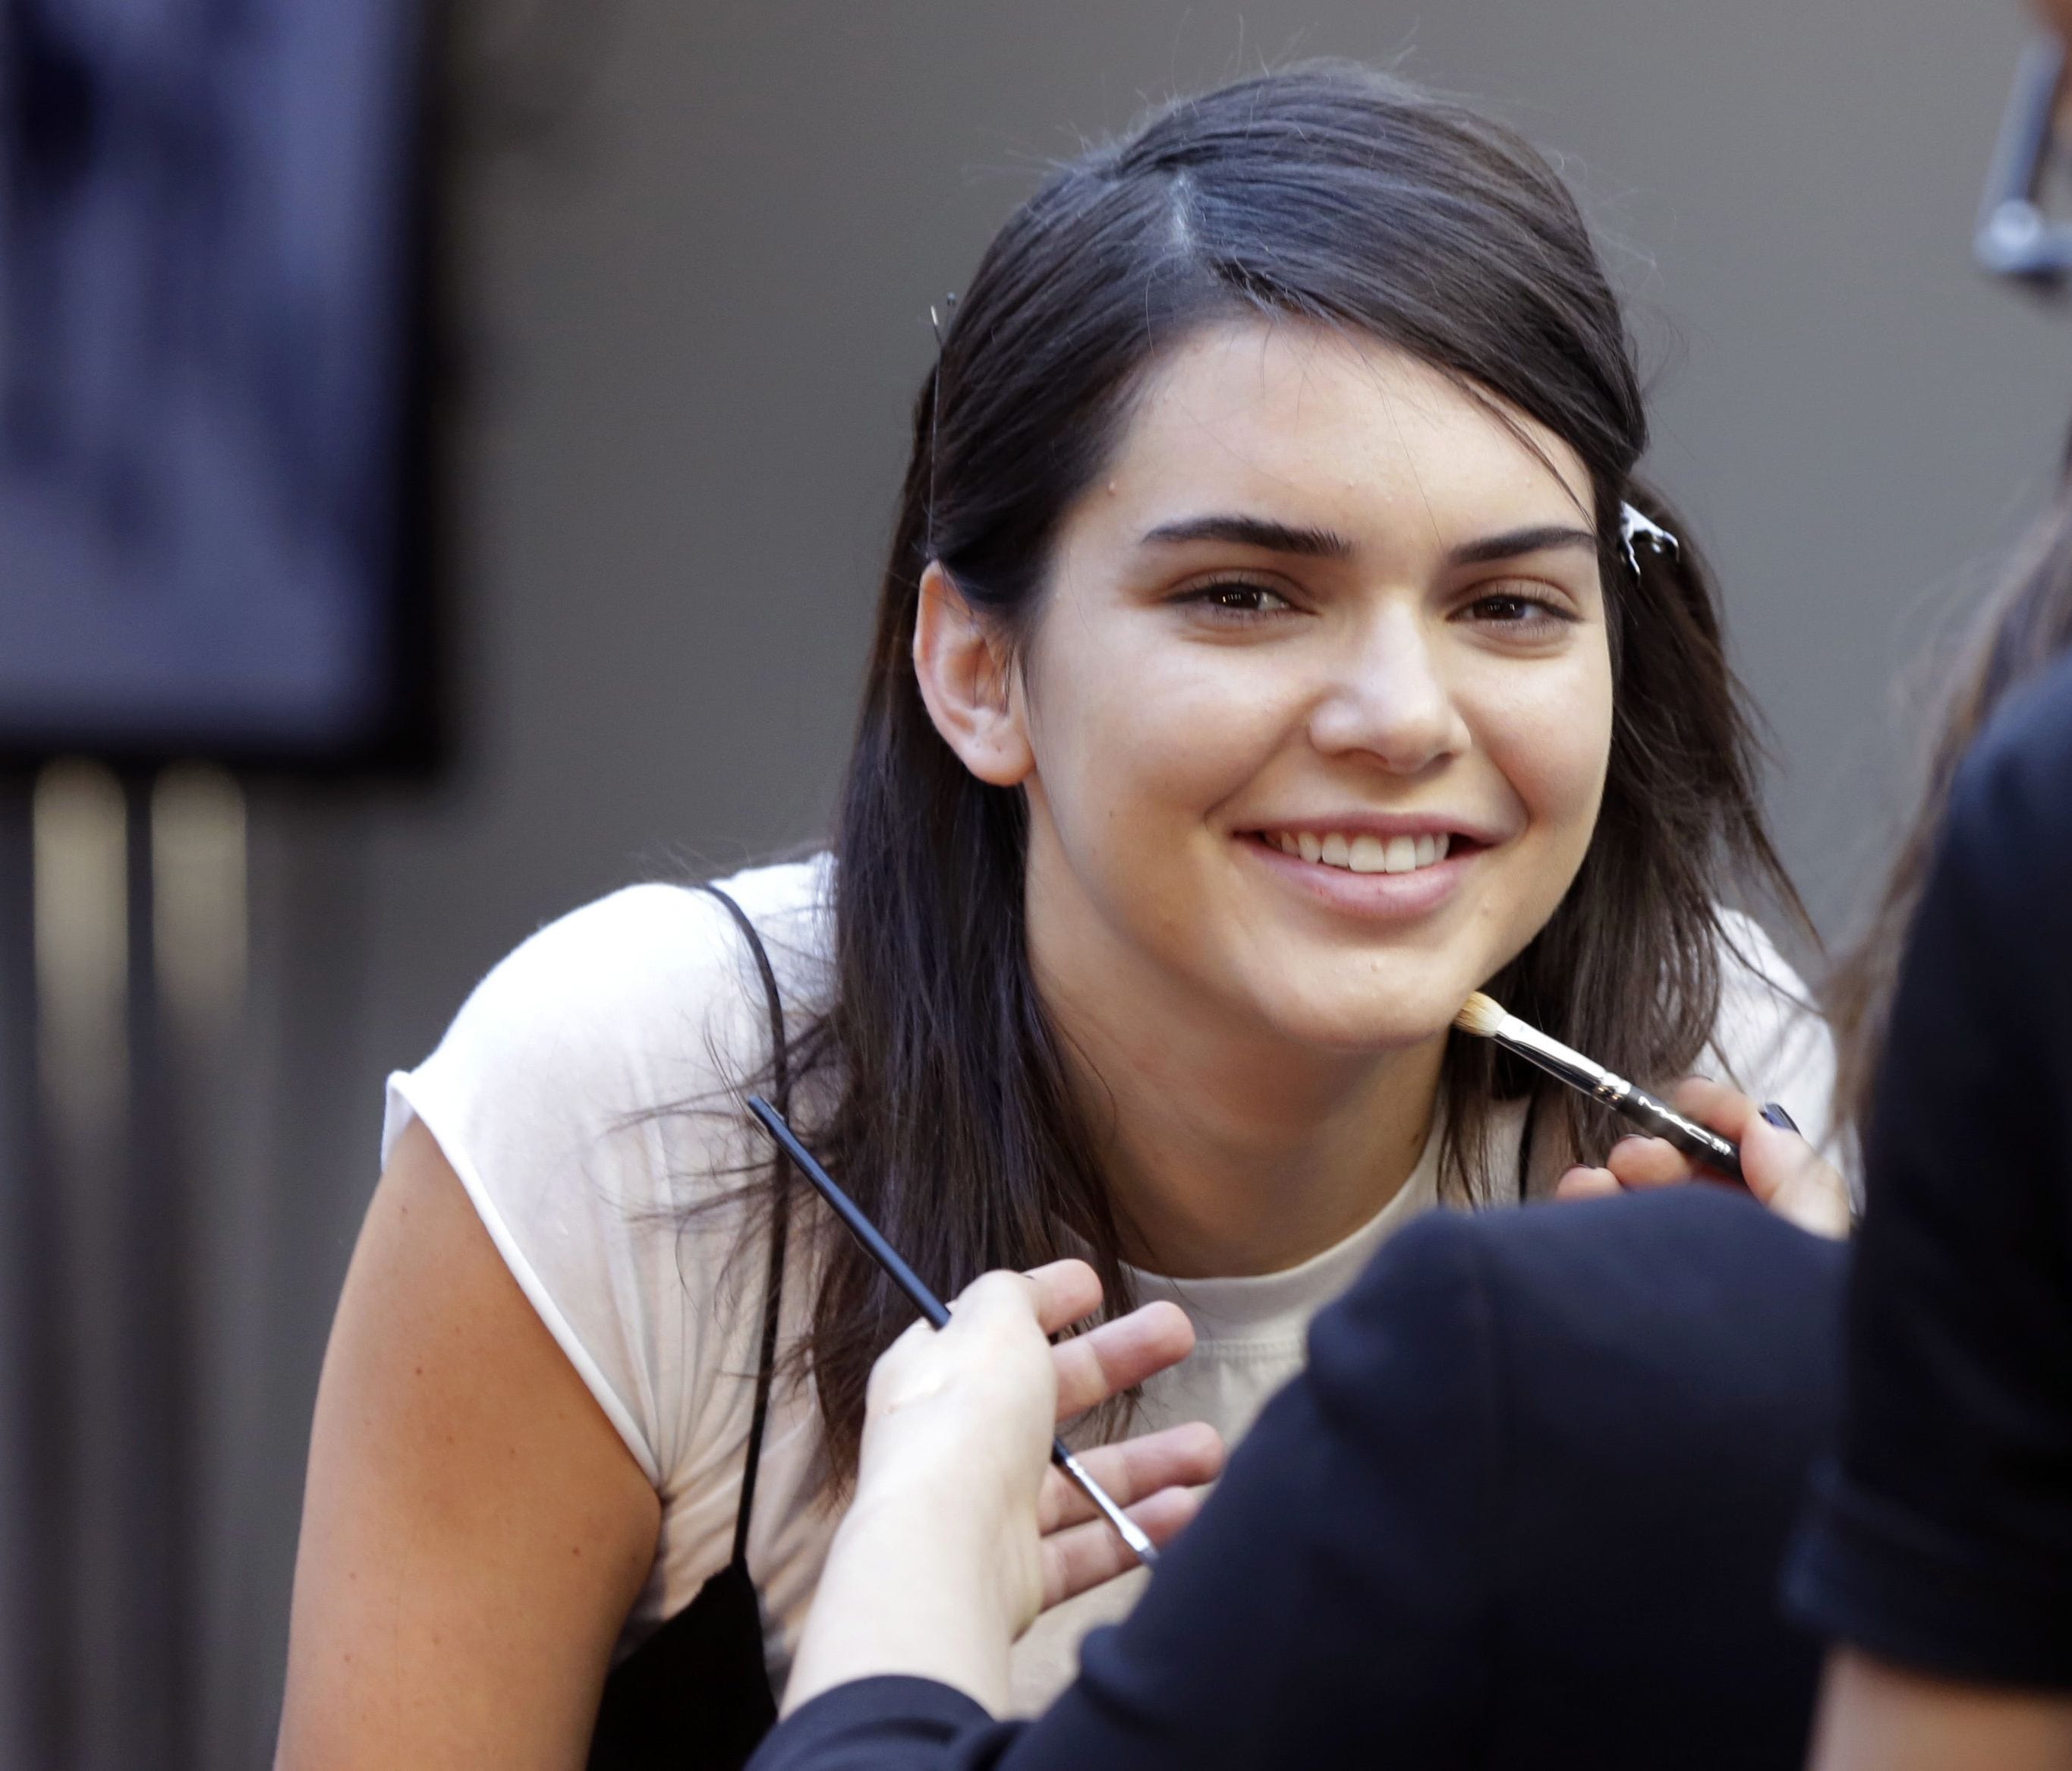 Model Kendall Jenner's Pepsi ad is being taken off the air. Here she is getting makeup for a modeling session.